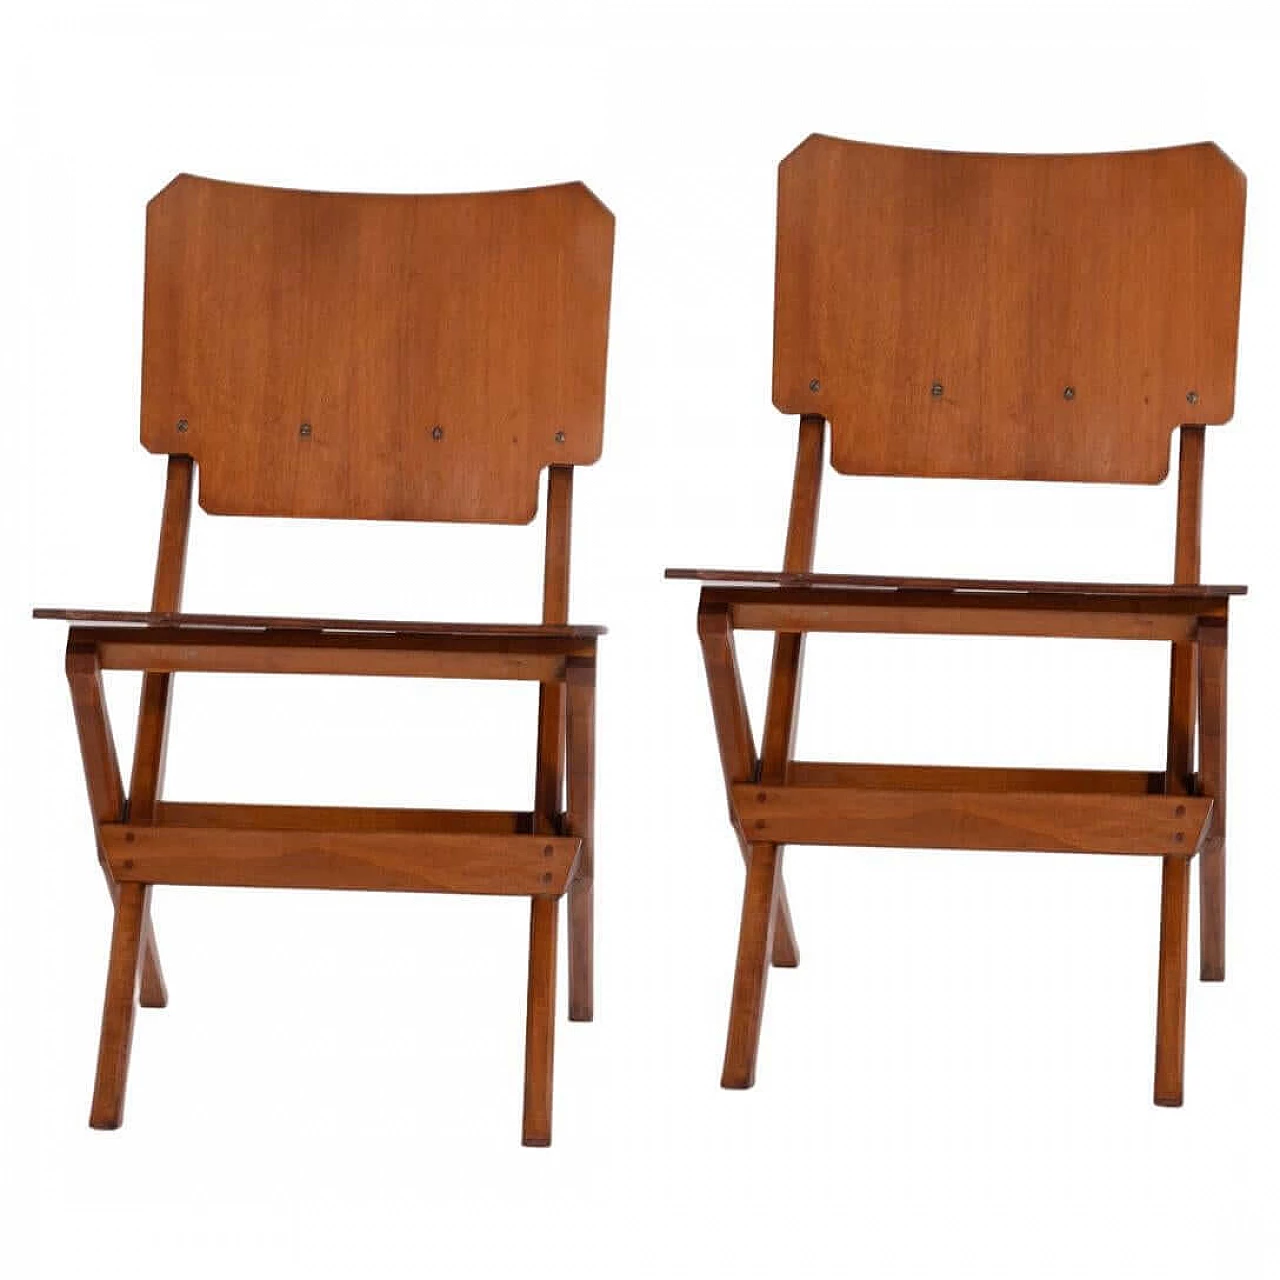 Pair of wooden chairs by Franco Albini for Poggi, 1950s 1412856